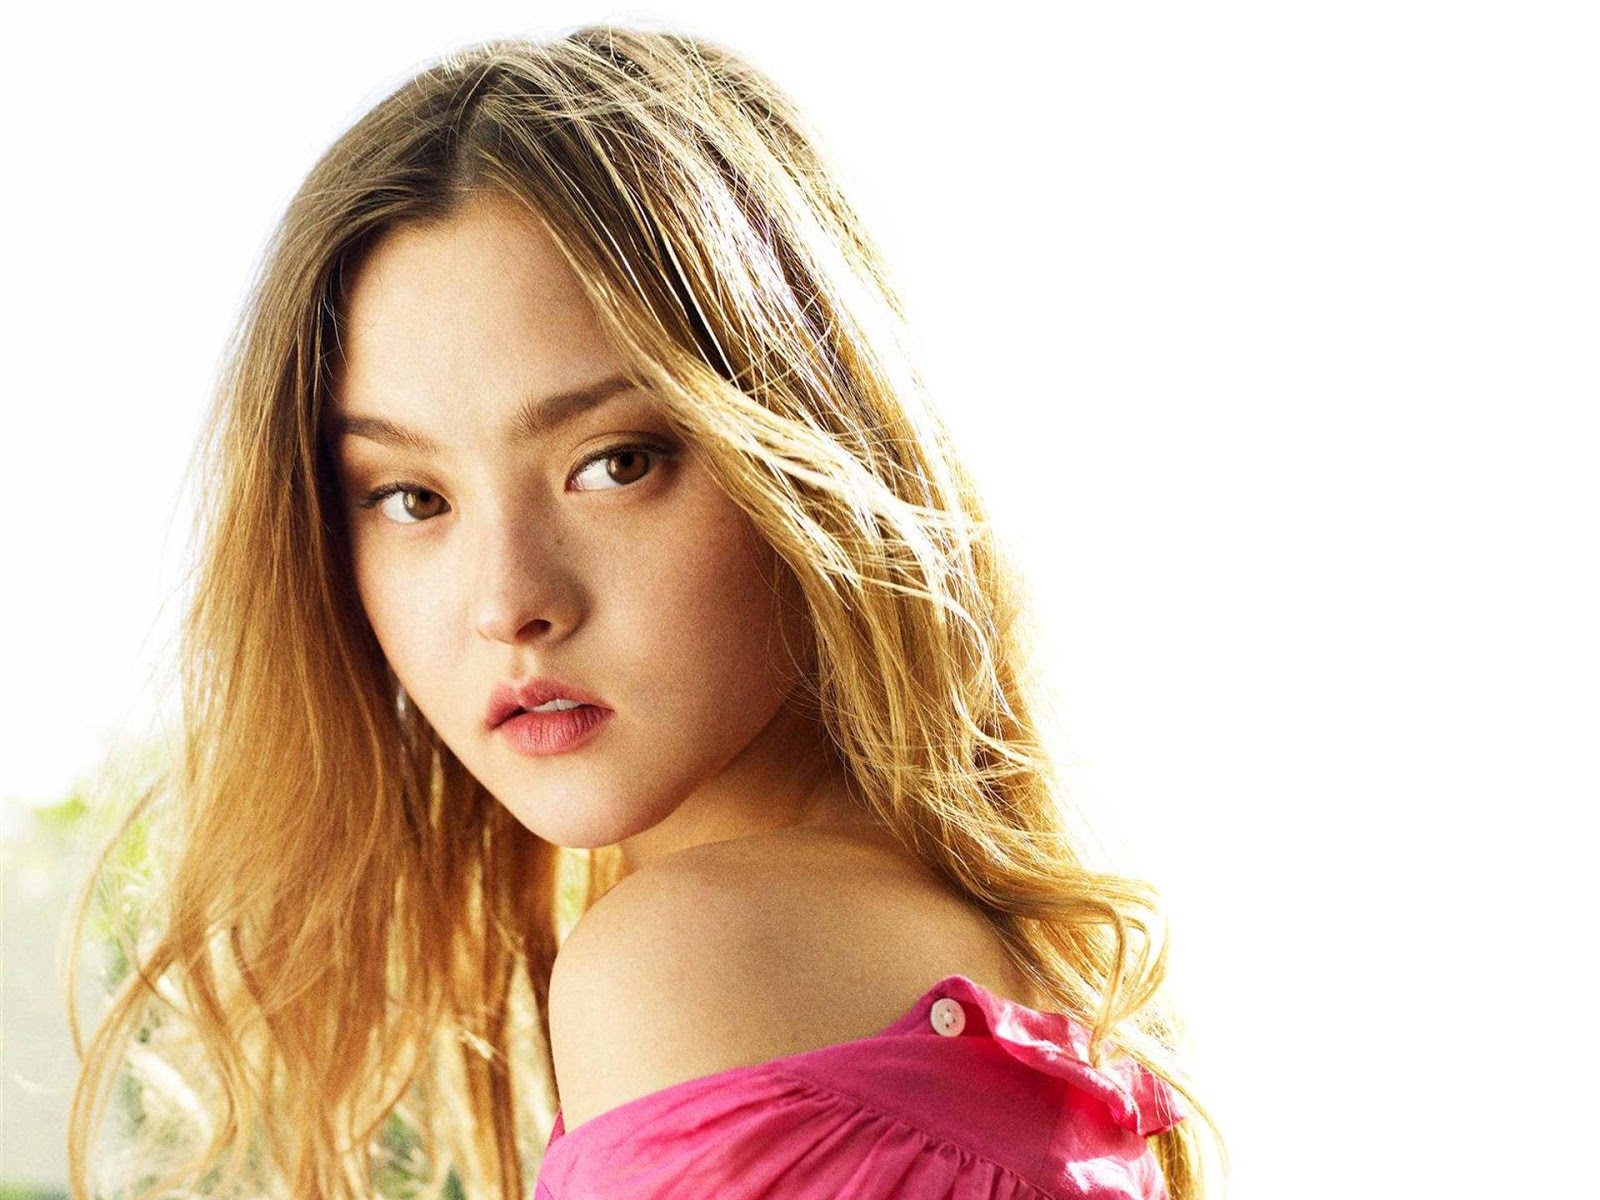 ... Devon Aoki Biography And Photos | Girls Idols Photos Wallpapers And